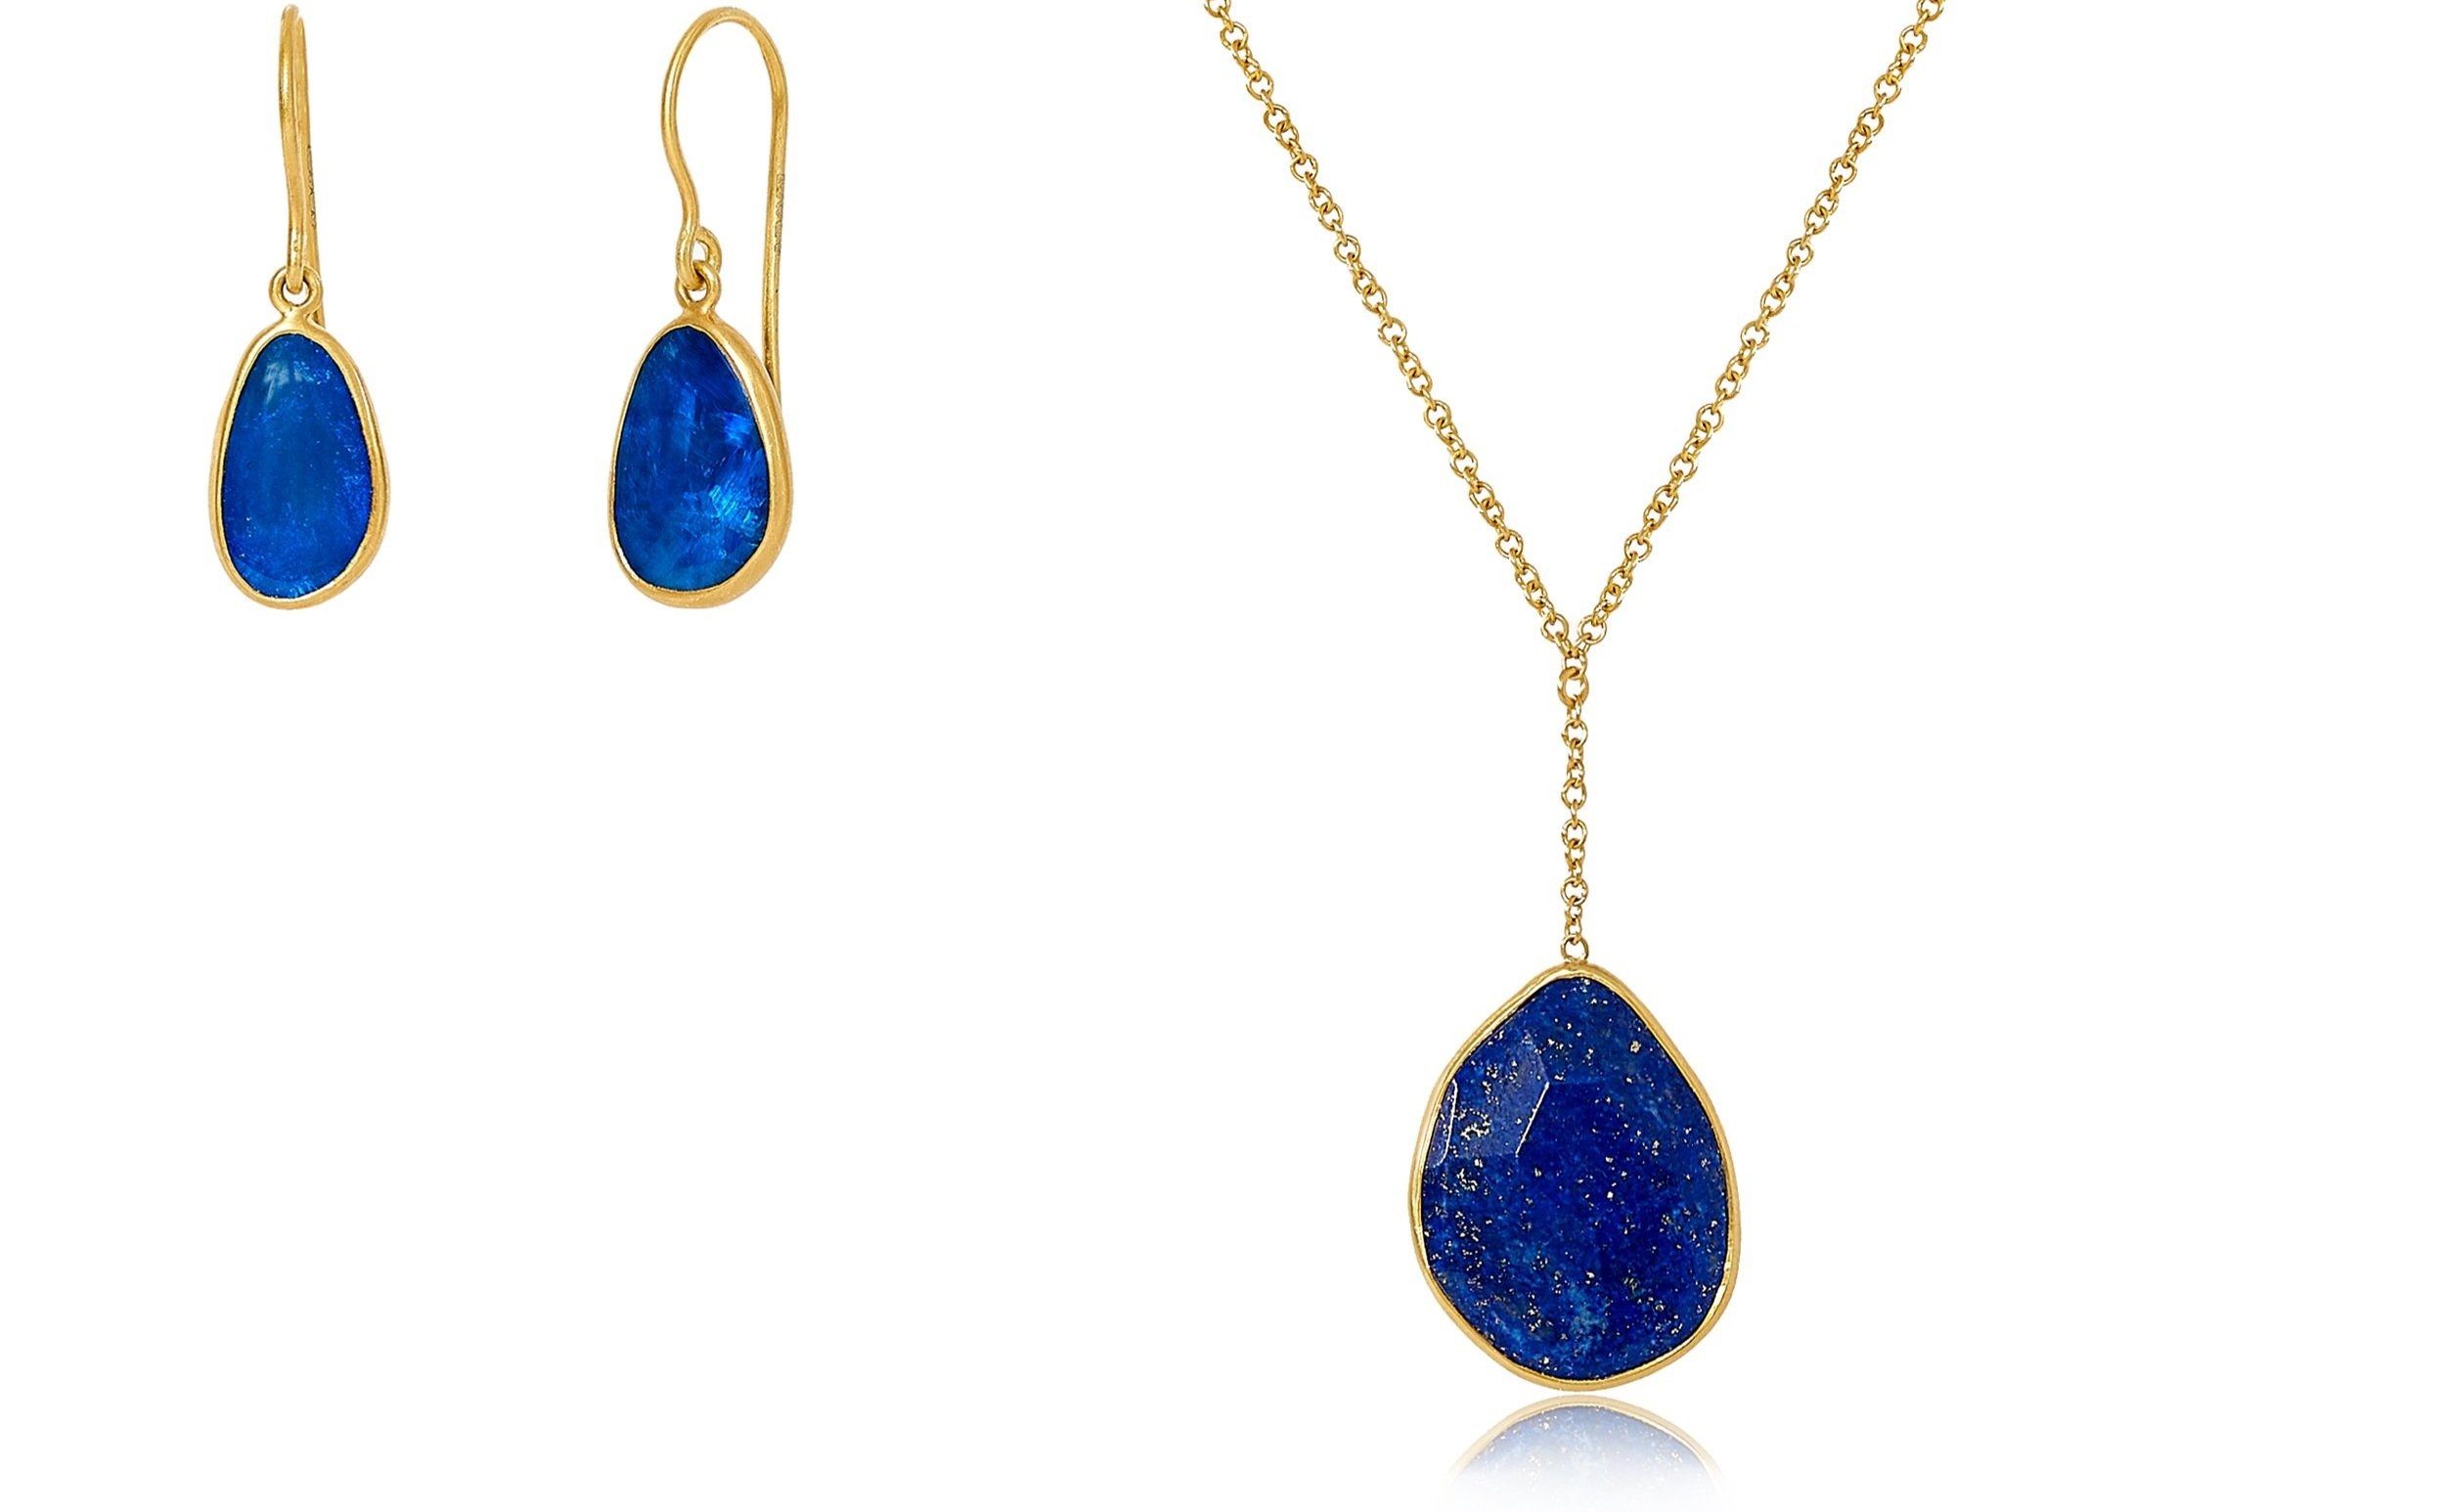 Gold earrings and necklace with deep blue and gold flecked stones.